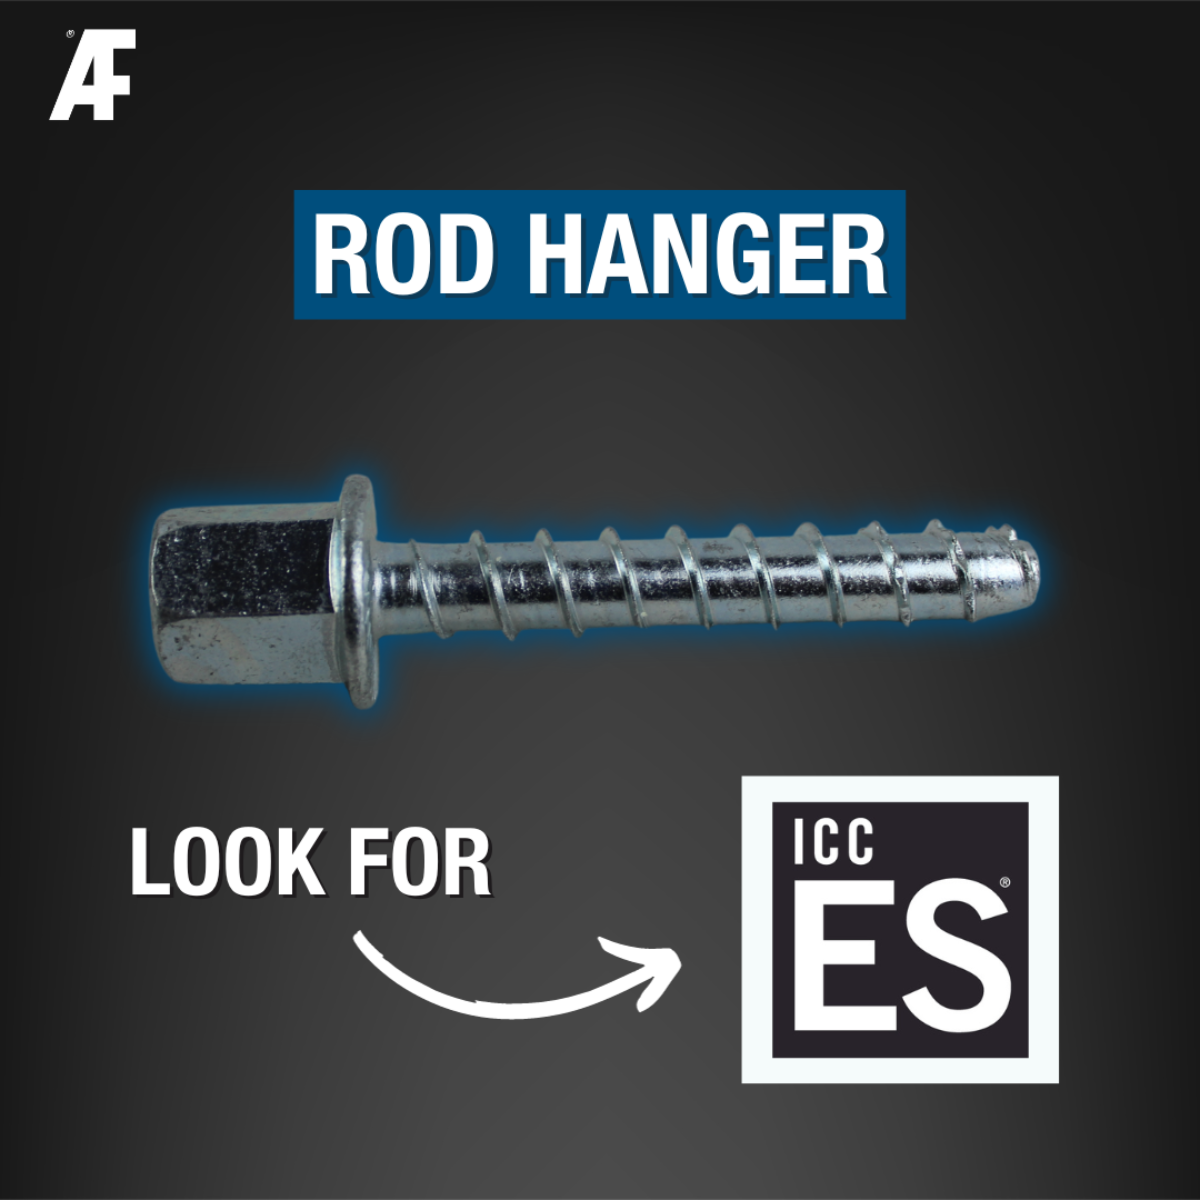 Why Use A Rod Hanger